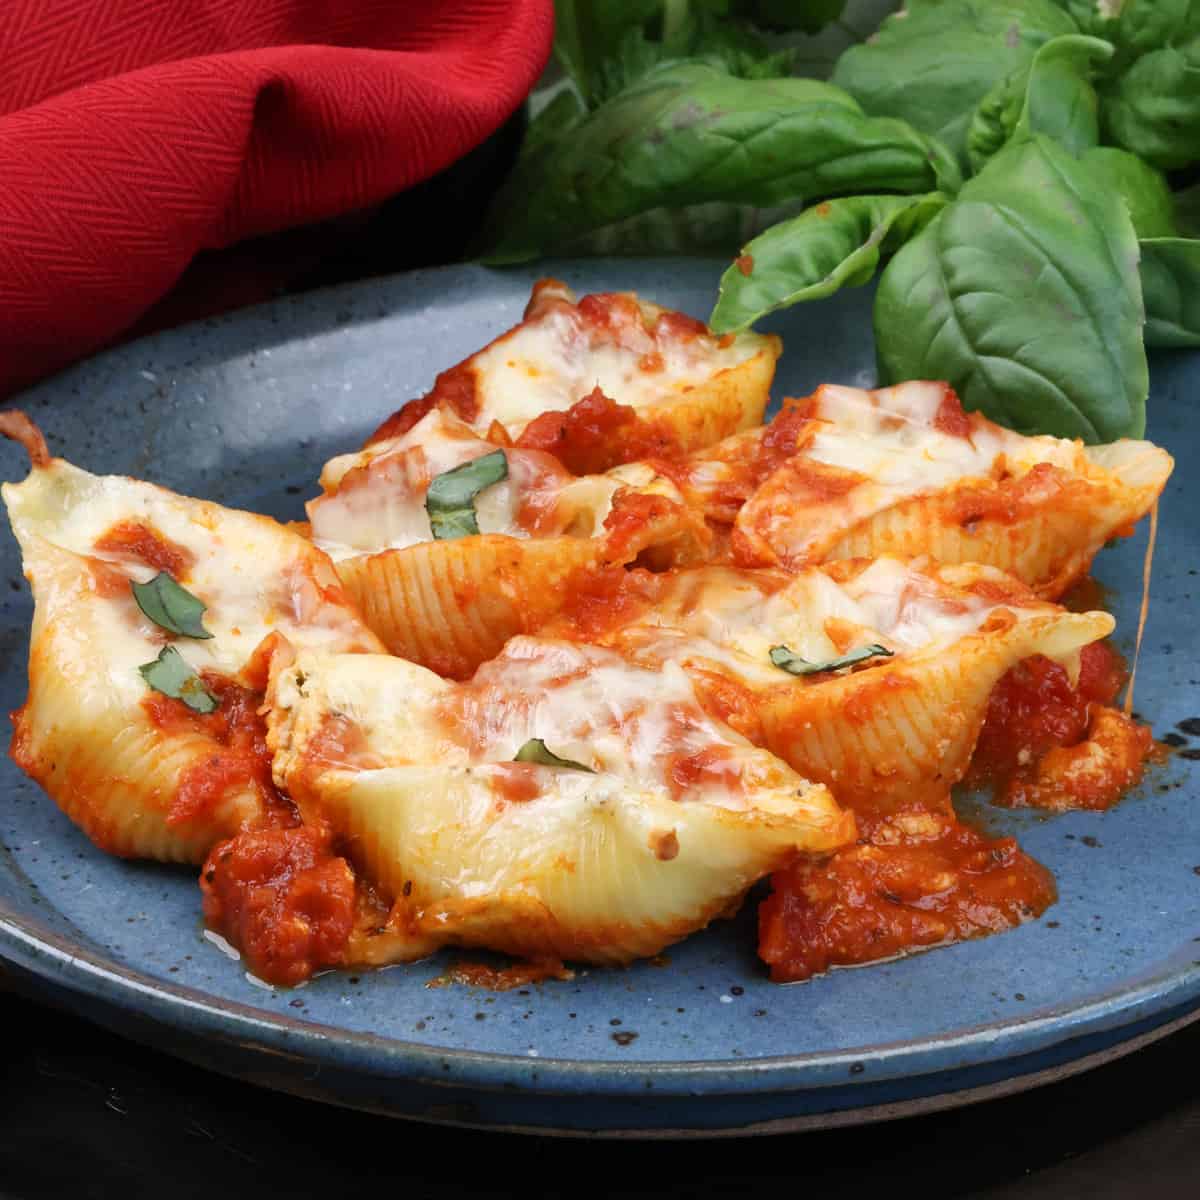 stuffed shells on a blue plate surrounded by tomato sauce